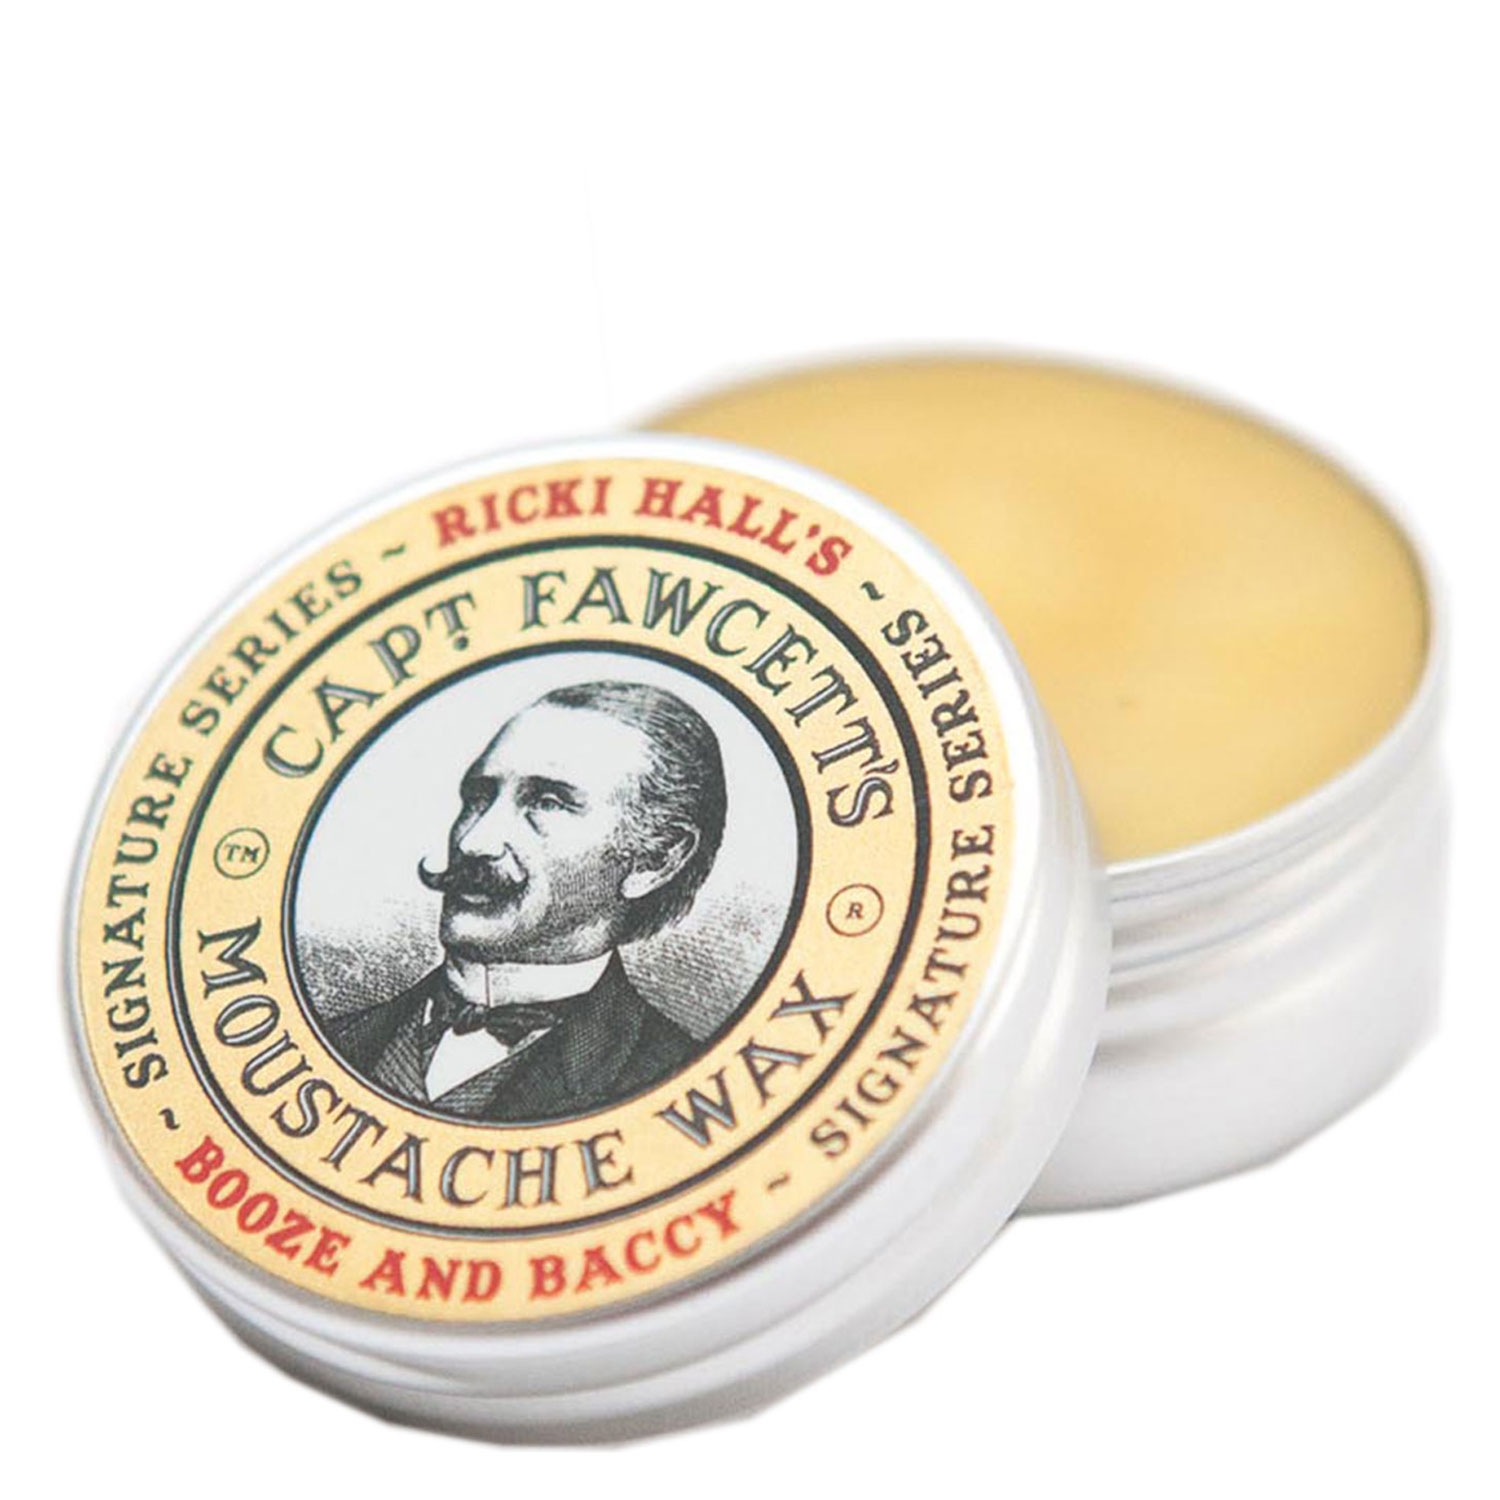 Product image from Capt. Fawcett Care - Ricki Hall's Booze & Baccy Moustache Wax